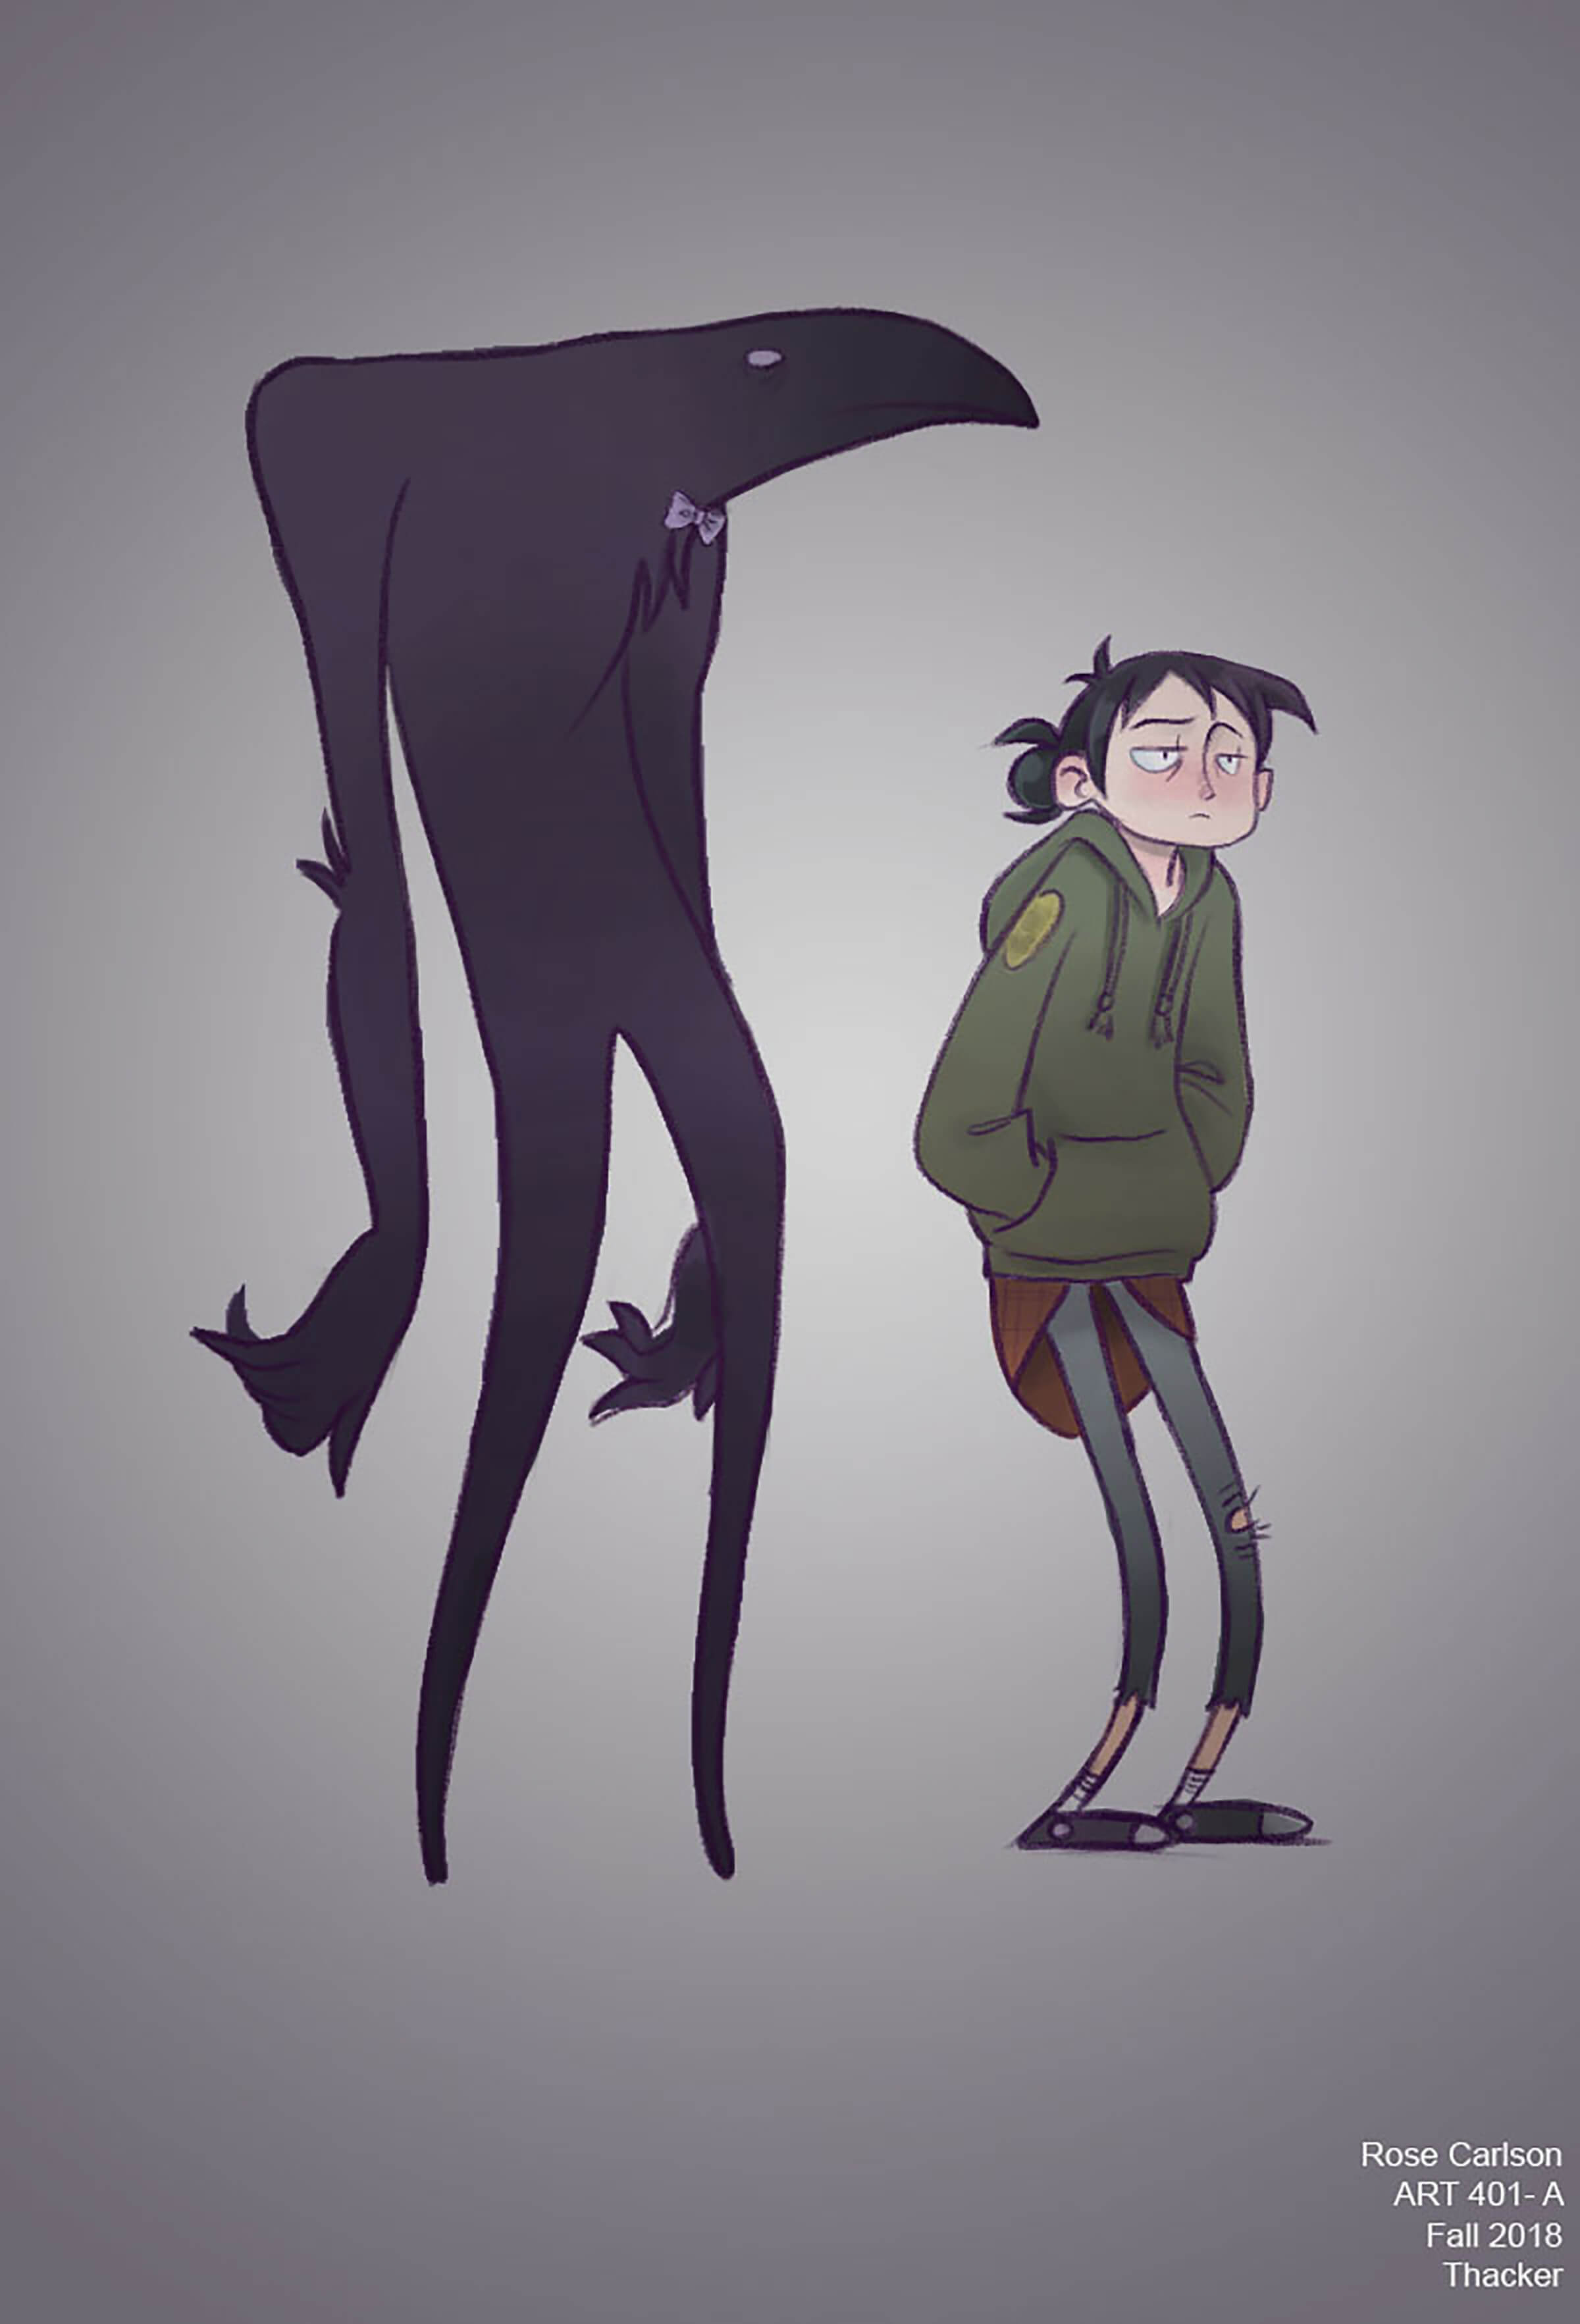 A slouchy girl in a sweatshirt next to large creature in a bow tie